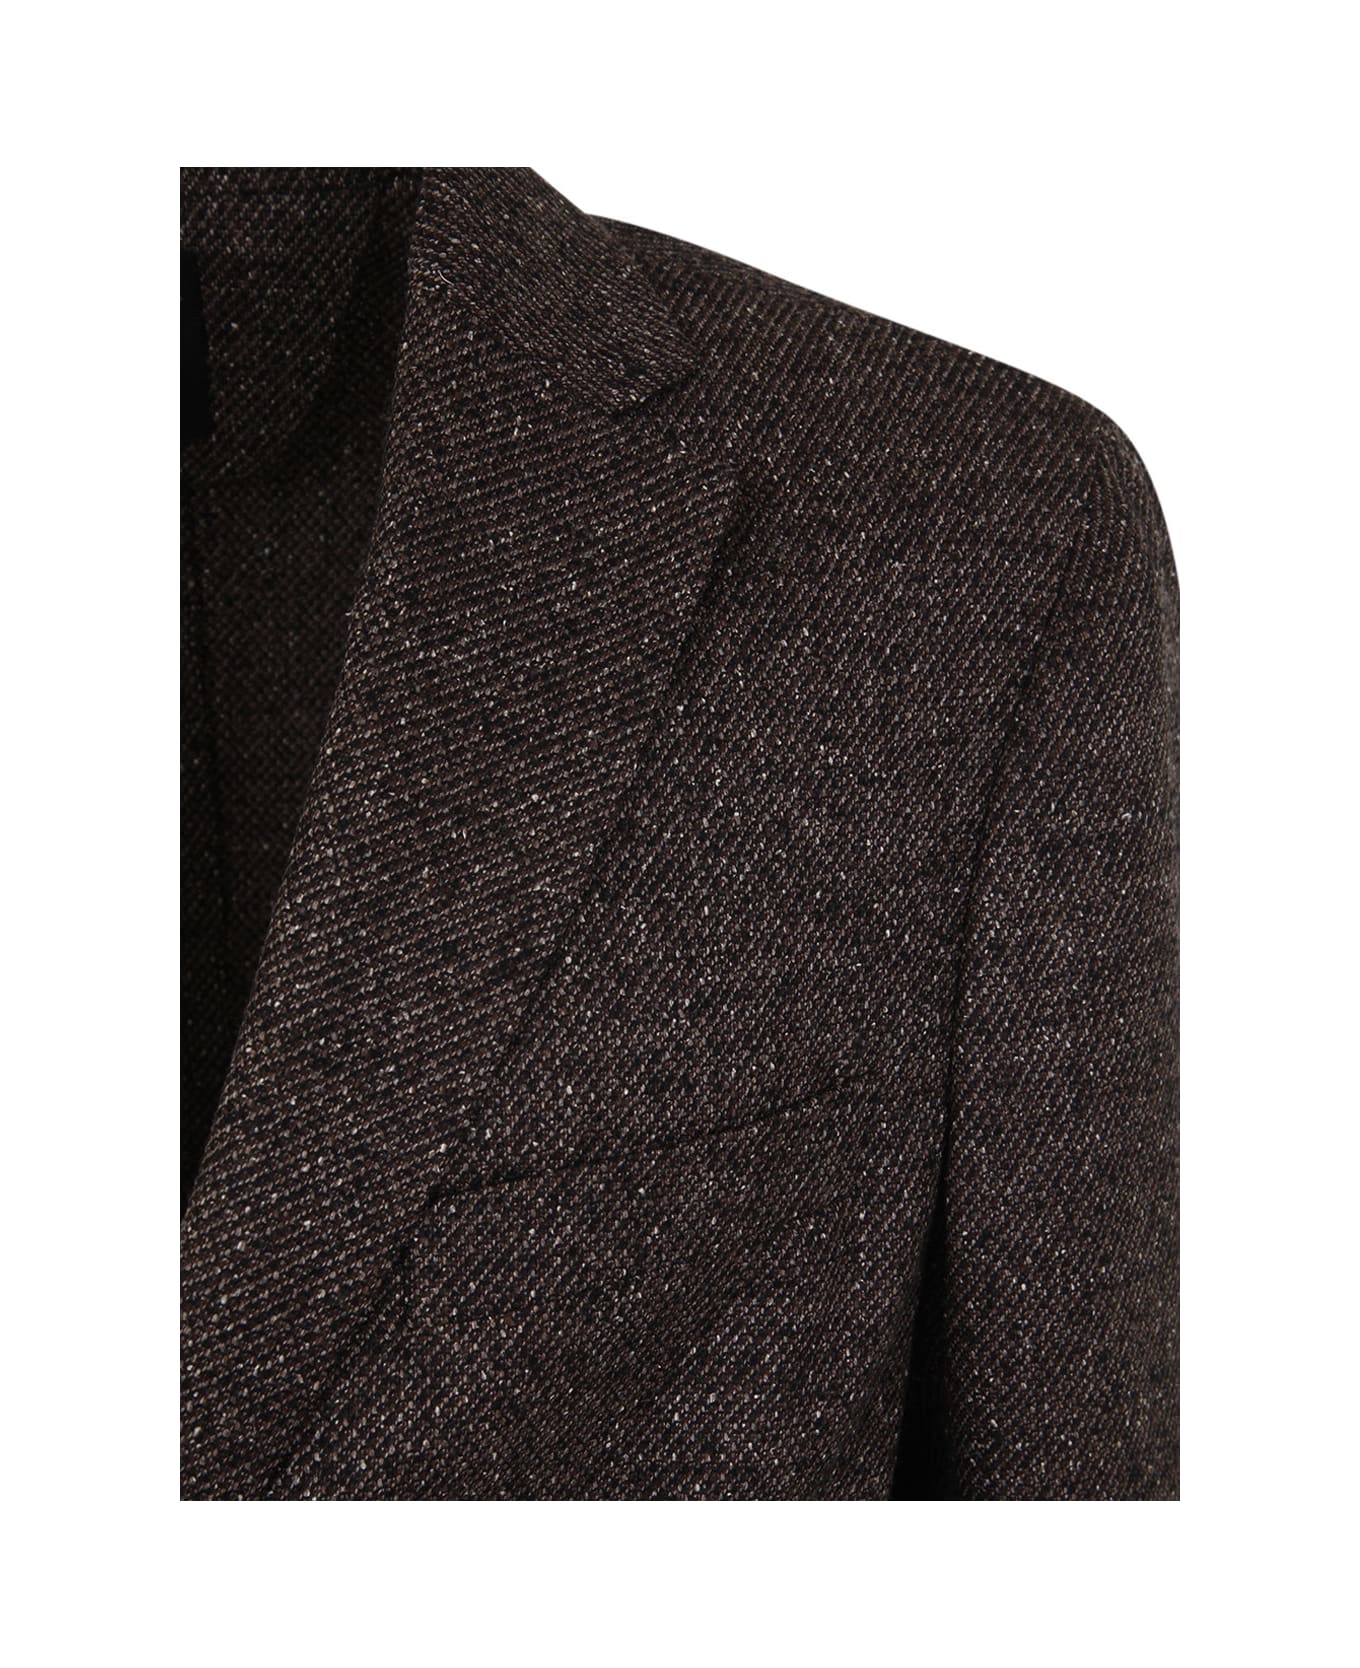 Zegna Wool And Silk Blend Jacket - Brown ブレザー